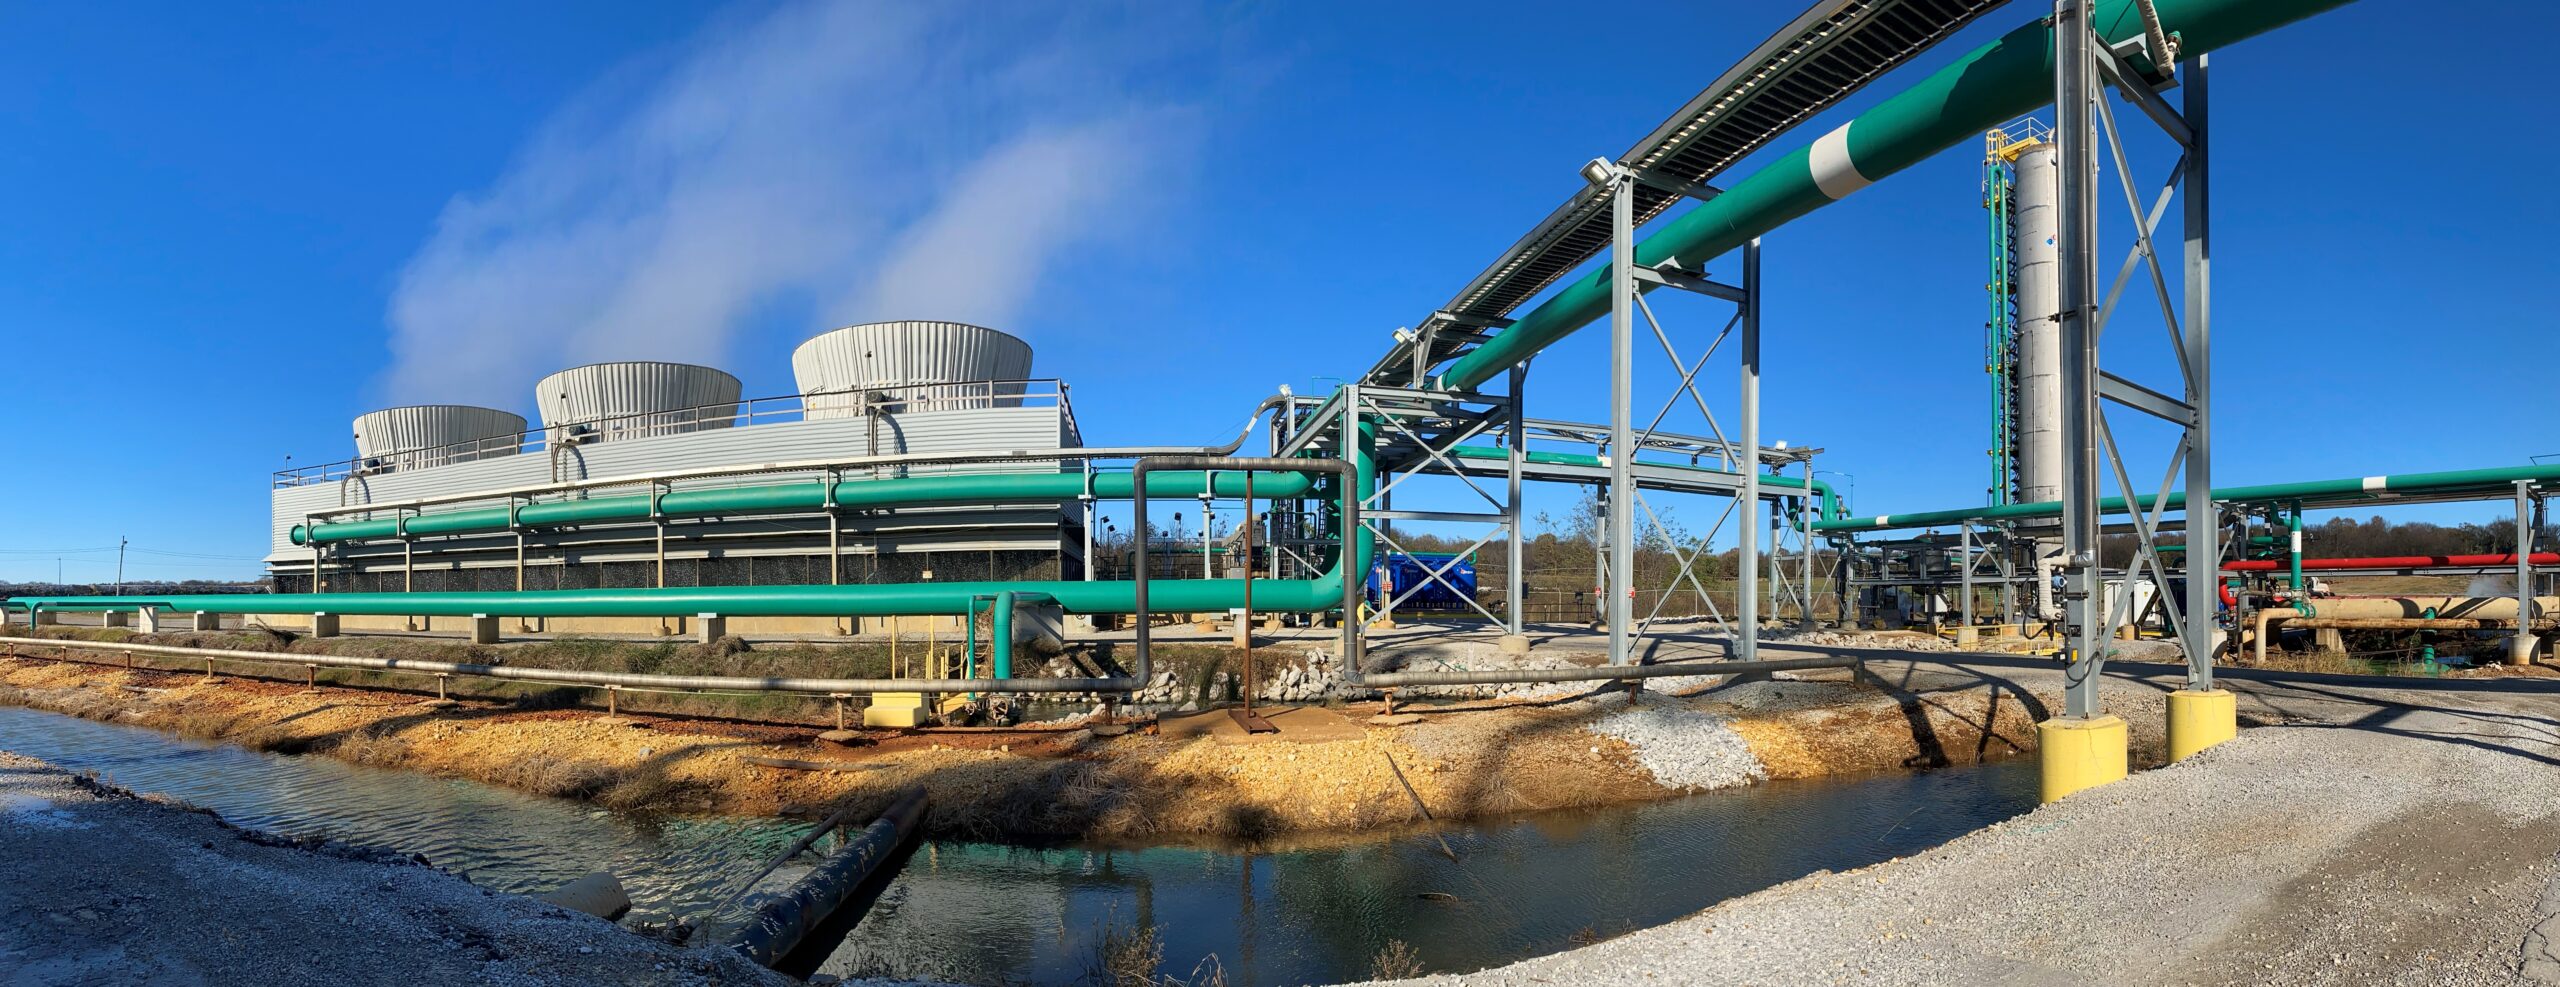 A picture of the Cherokee Nitrogen facility which uses Crest Water Solutions industrial wastewater treatment and water purification equipment and processes.